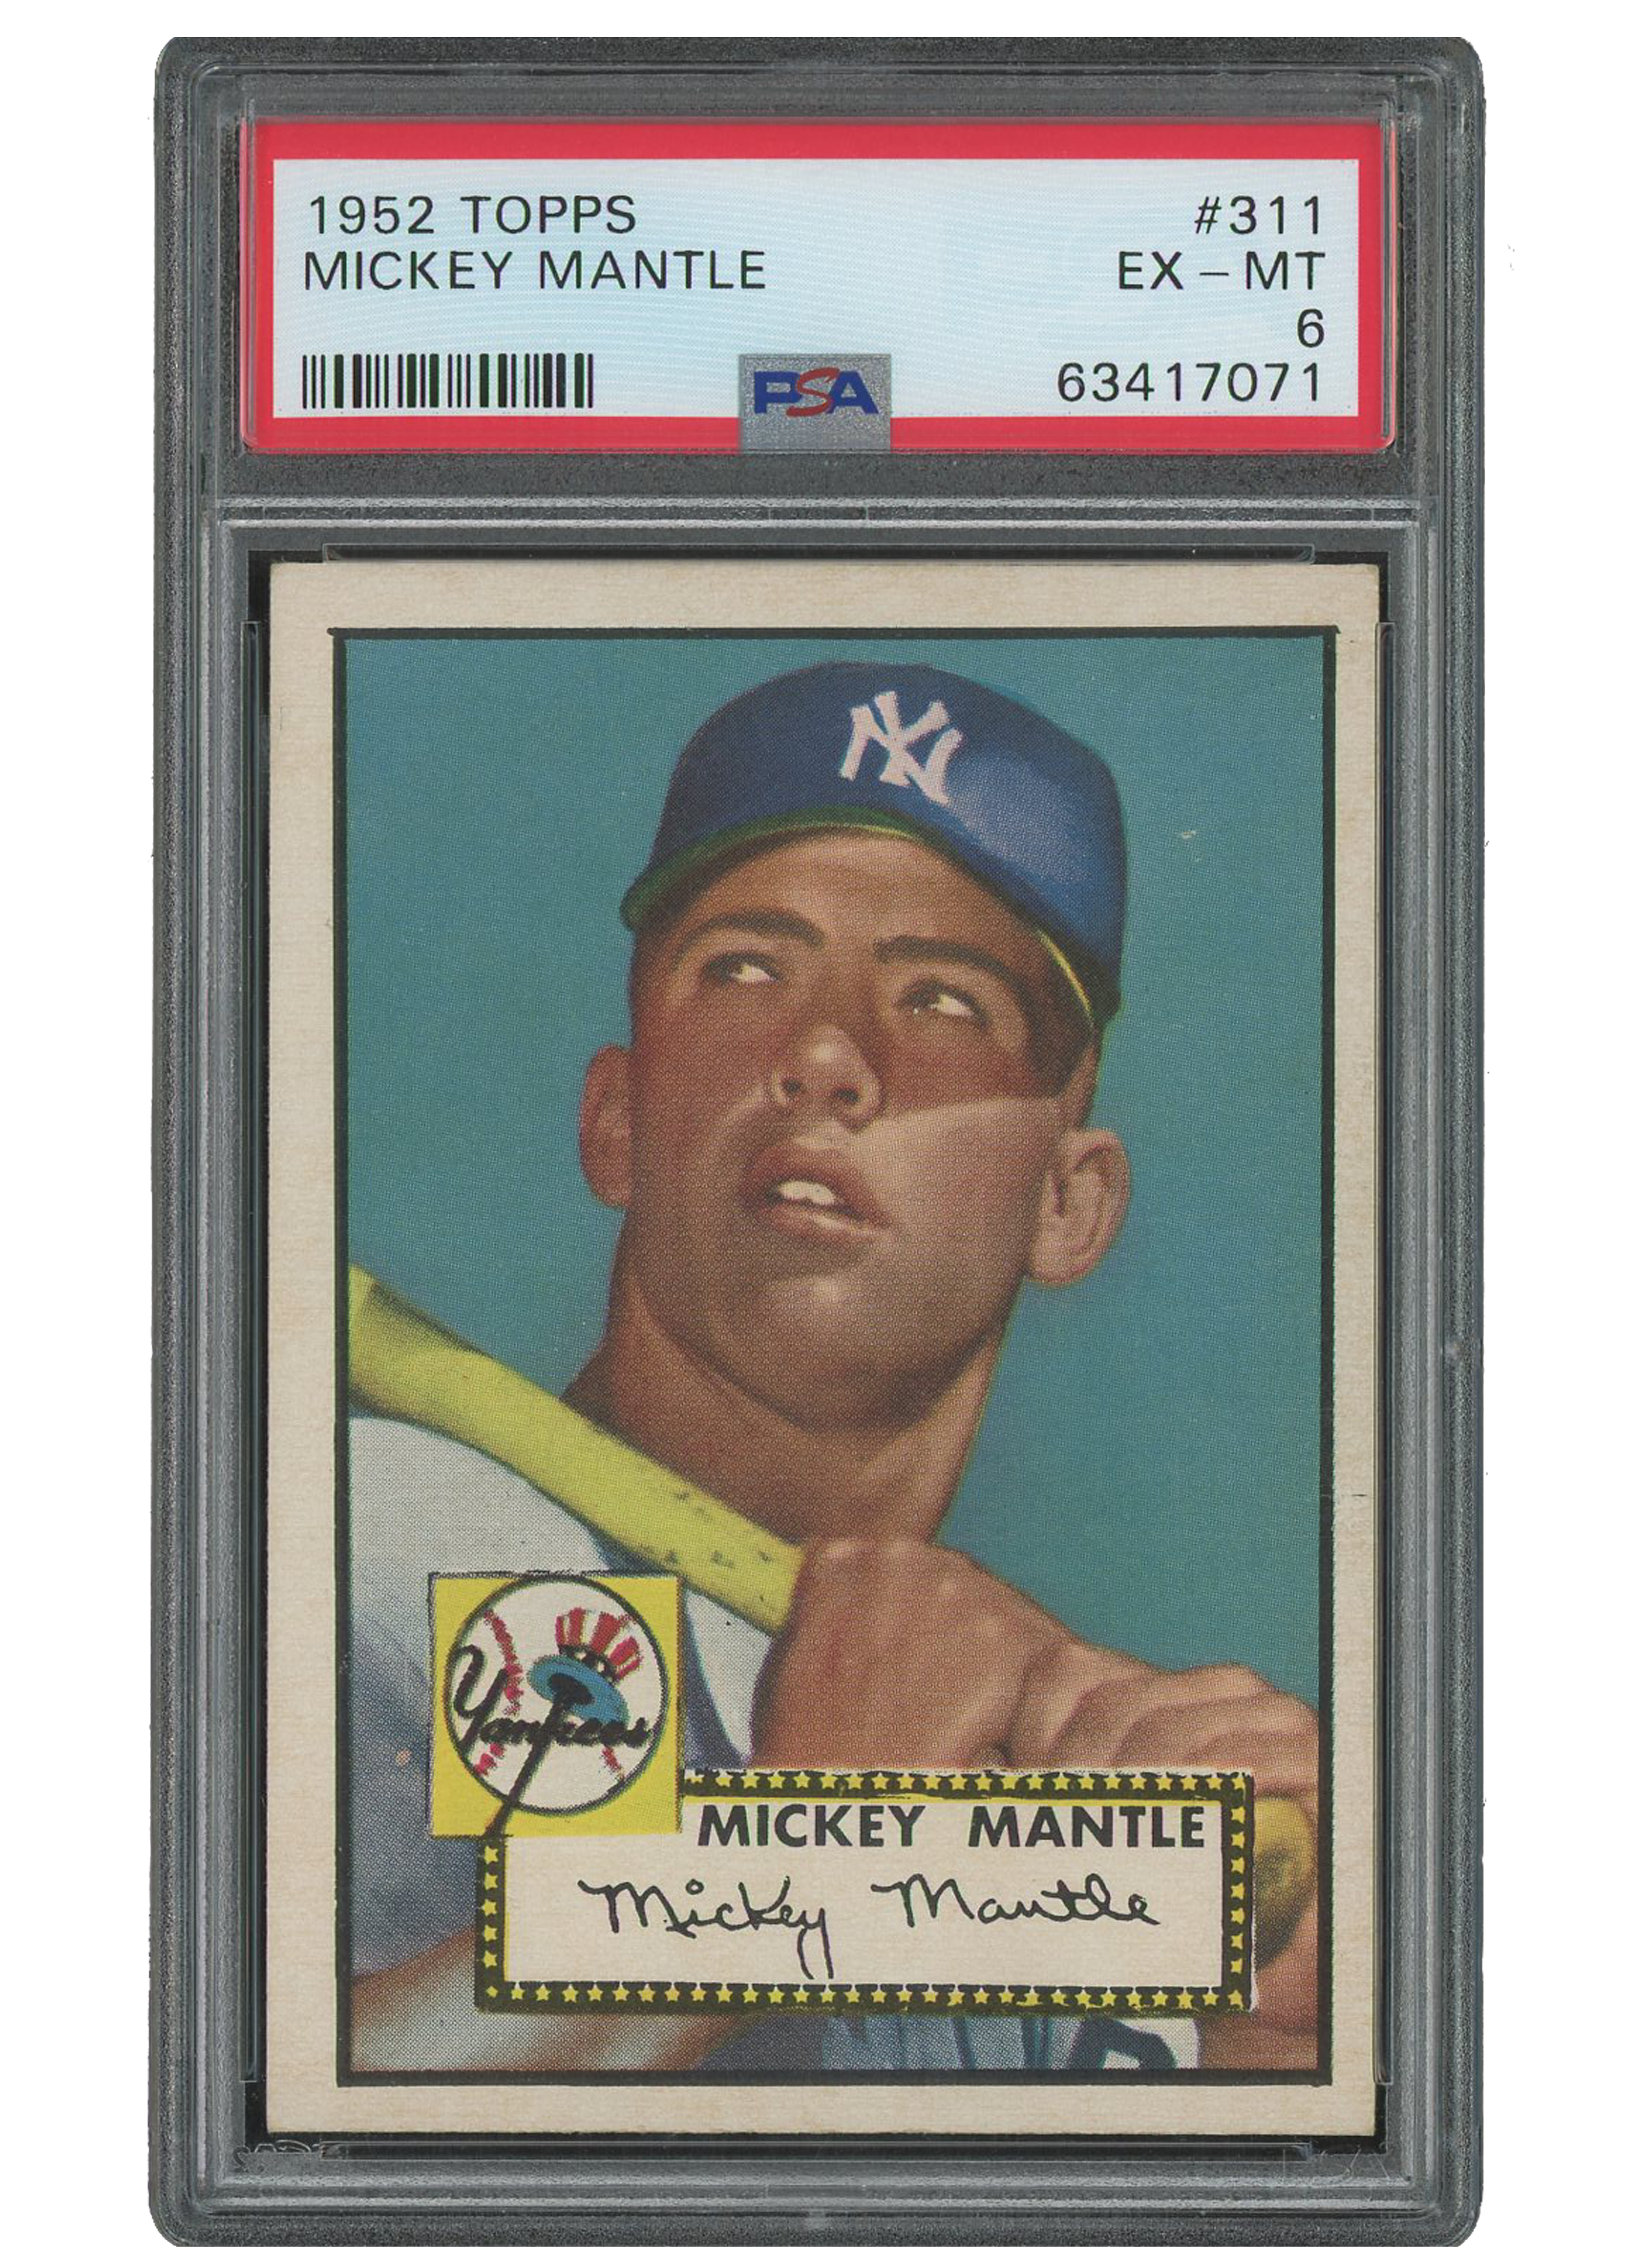 1966 Topps Mickey Mantle Signed PSA/DNA 4 Auto